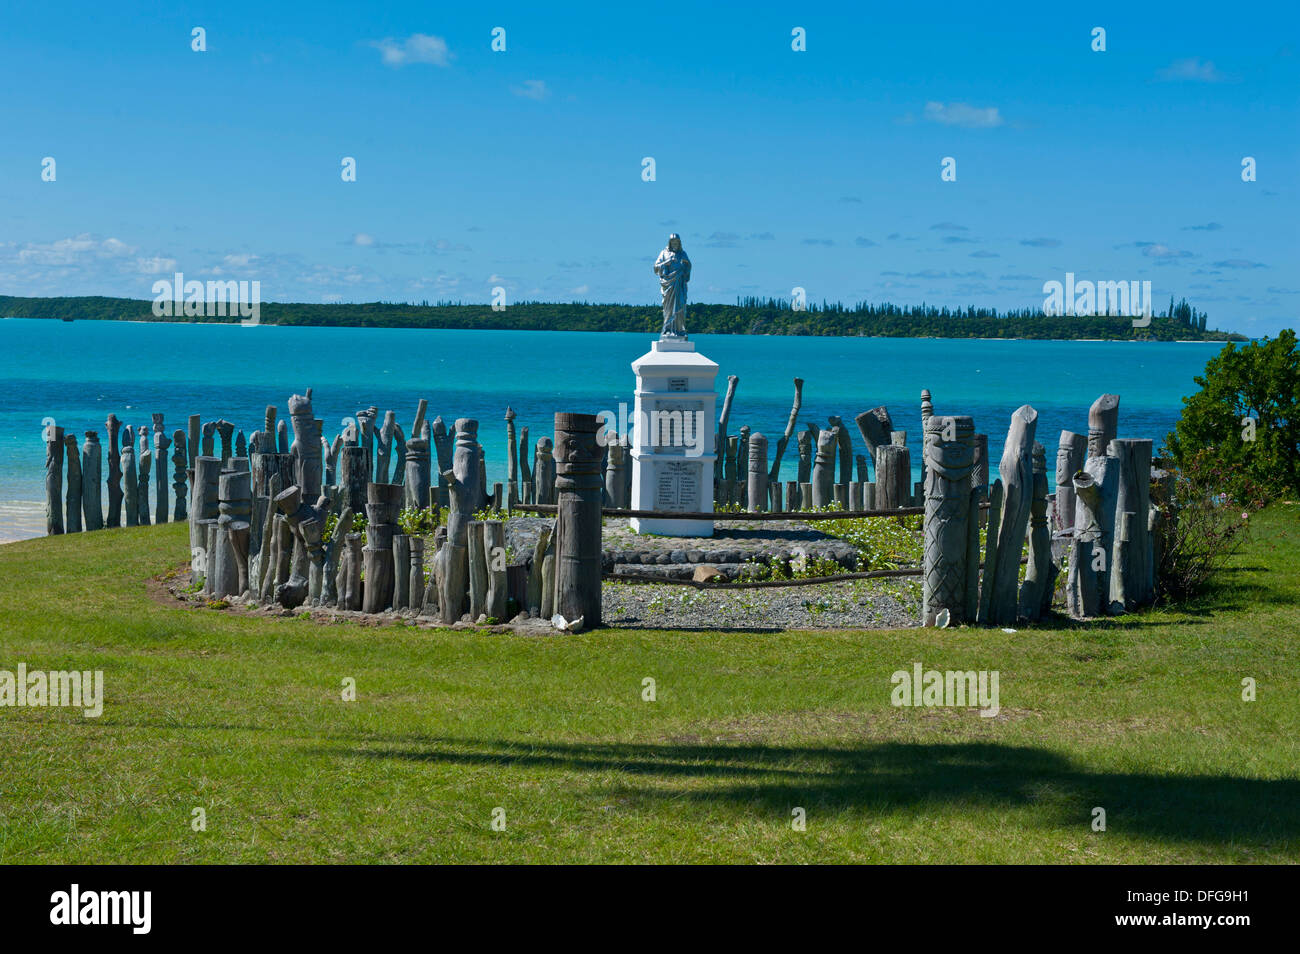 Traditional Christian statue, Île des Pins, New Caledonia, France Stock Photo